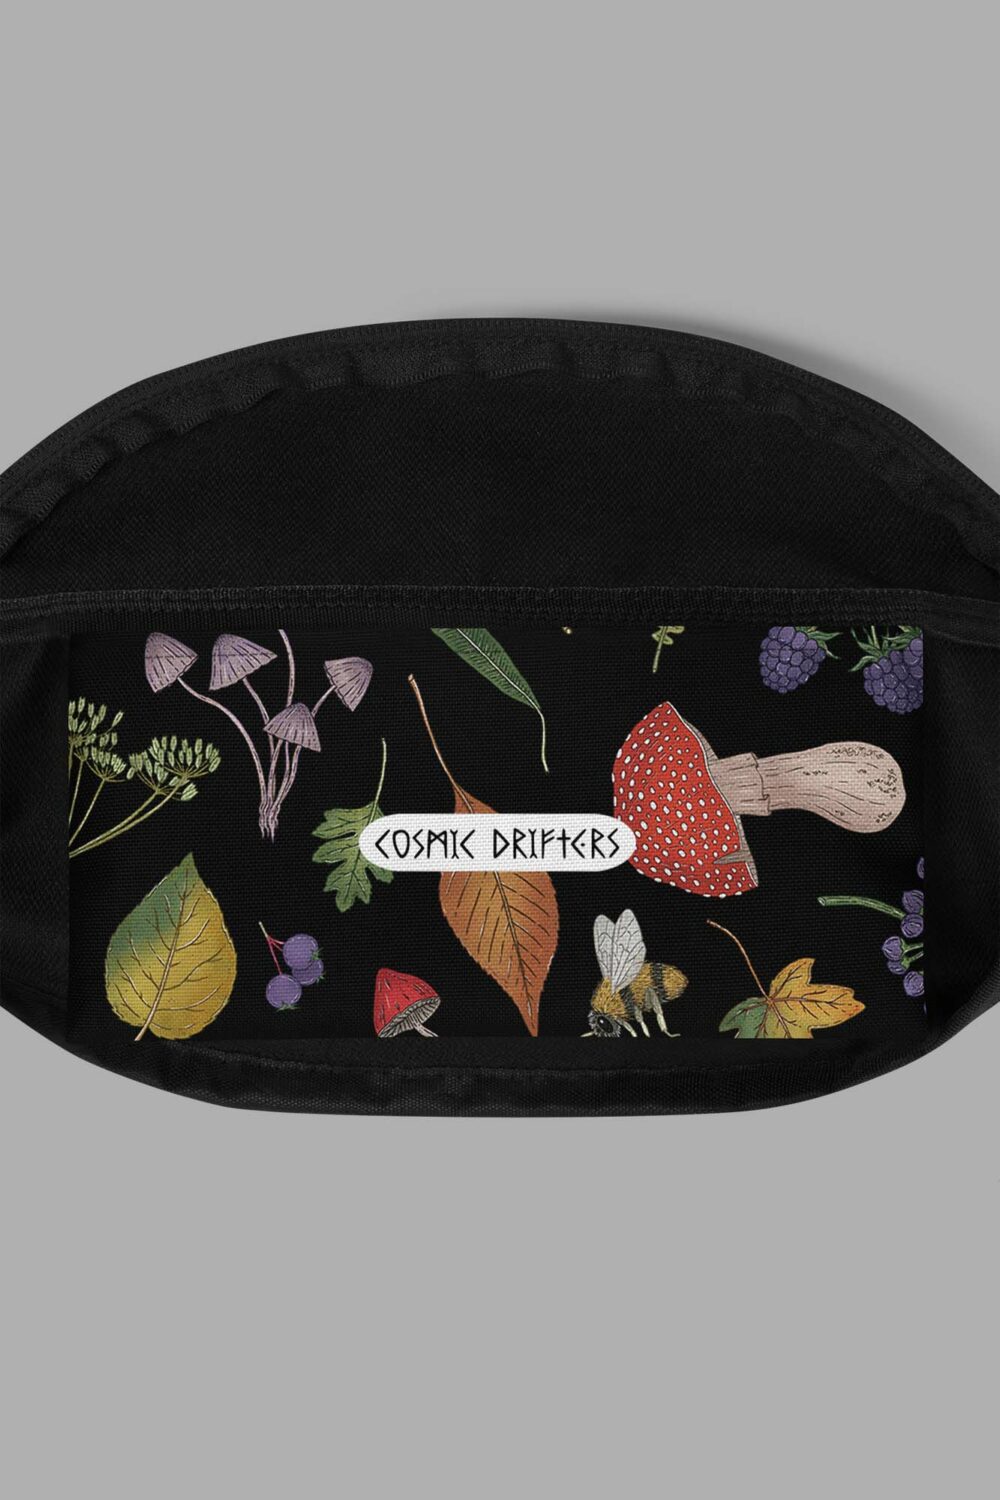 cosmic drifters hedge witch print fanny pack pocket